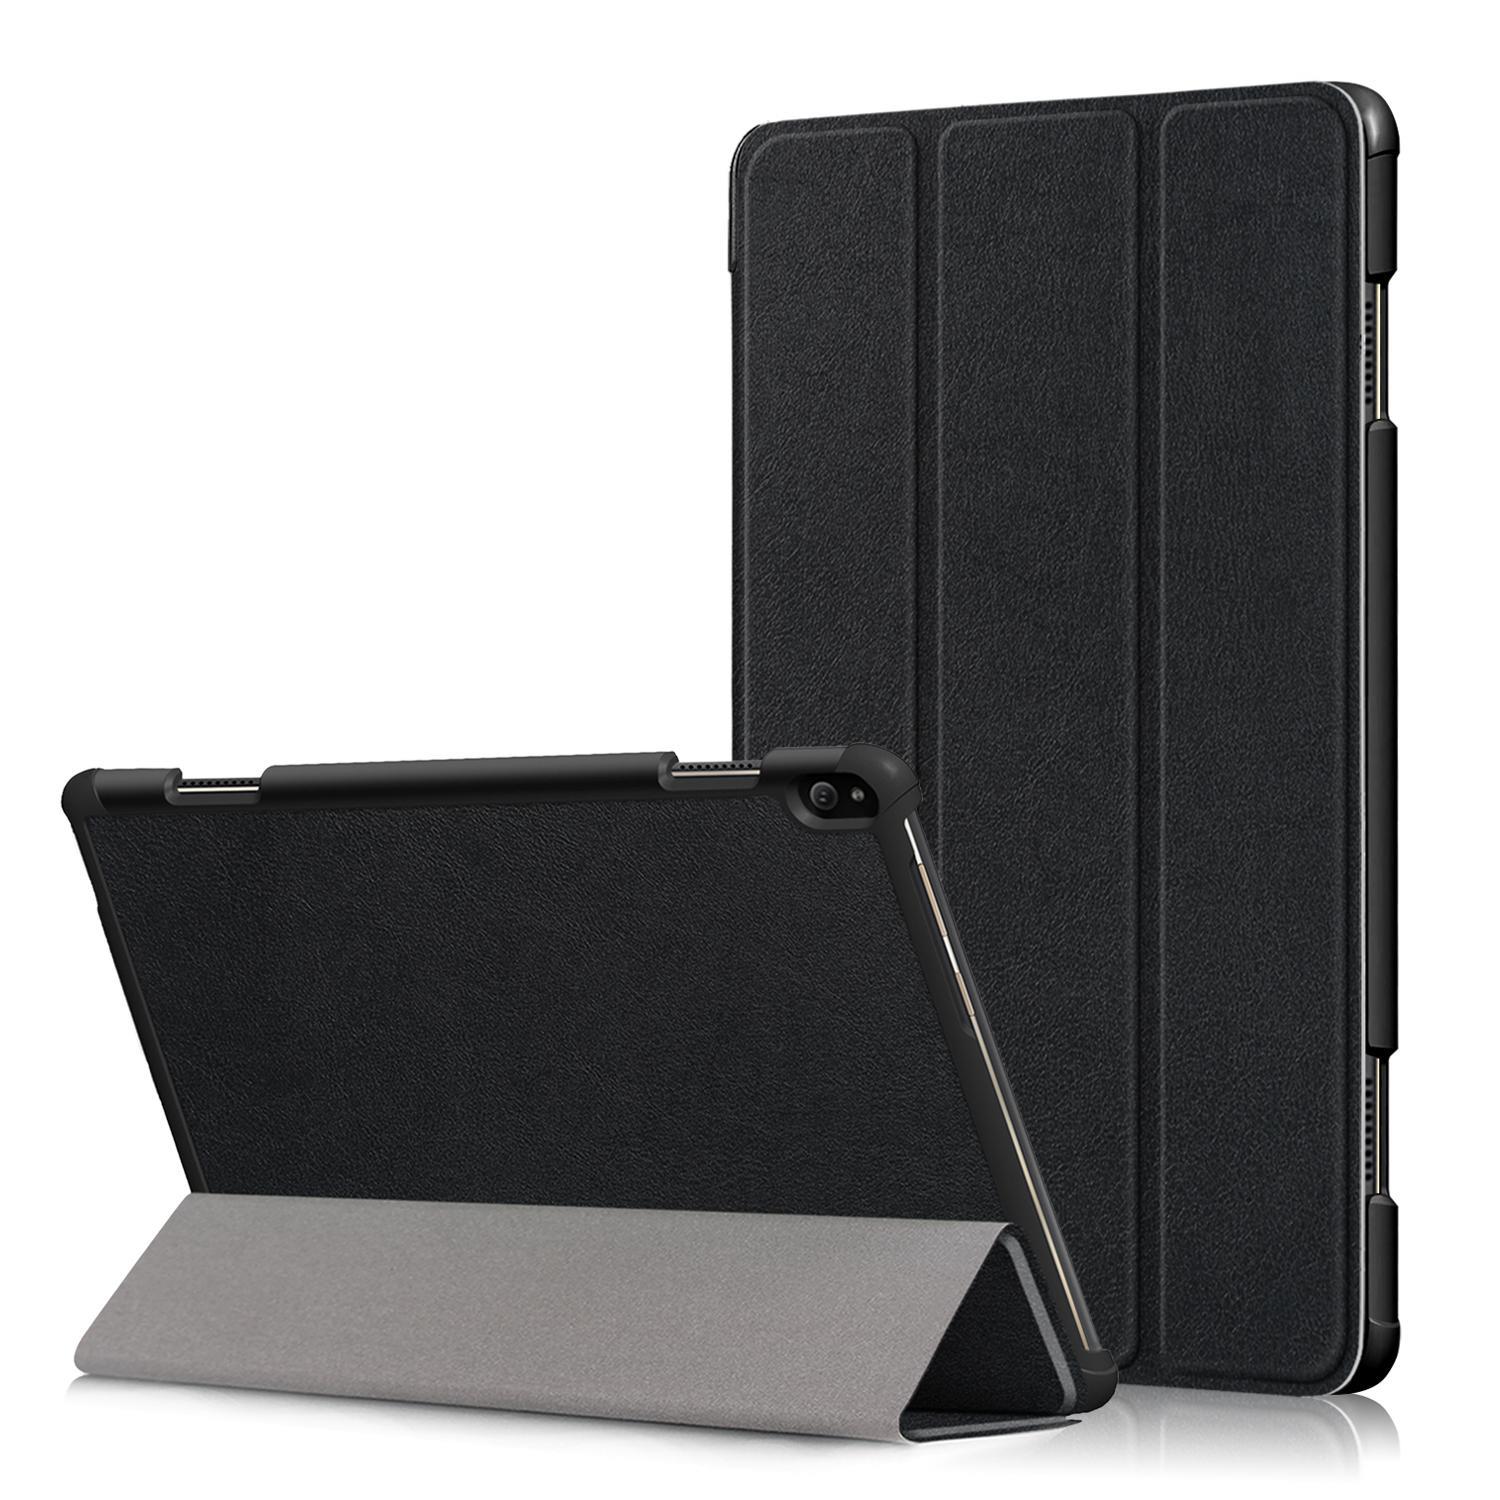 MCC For Lenovo Tab M10 2nd Gen Smart Leather Case Cover Tablet TB-X306 10" [Black]